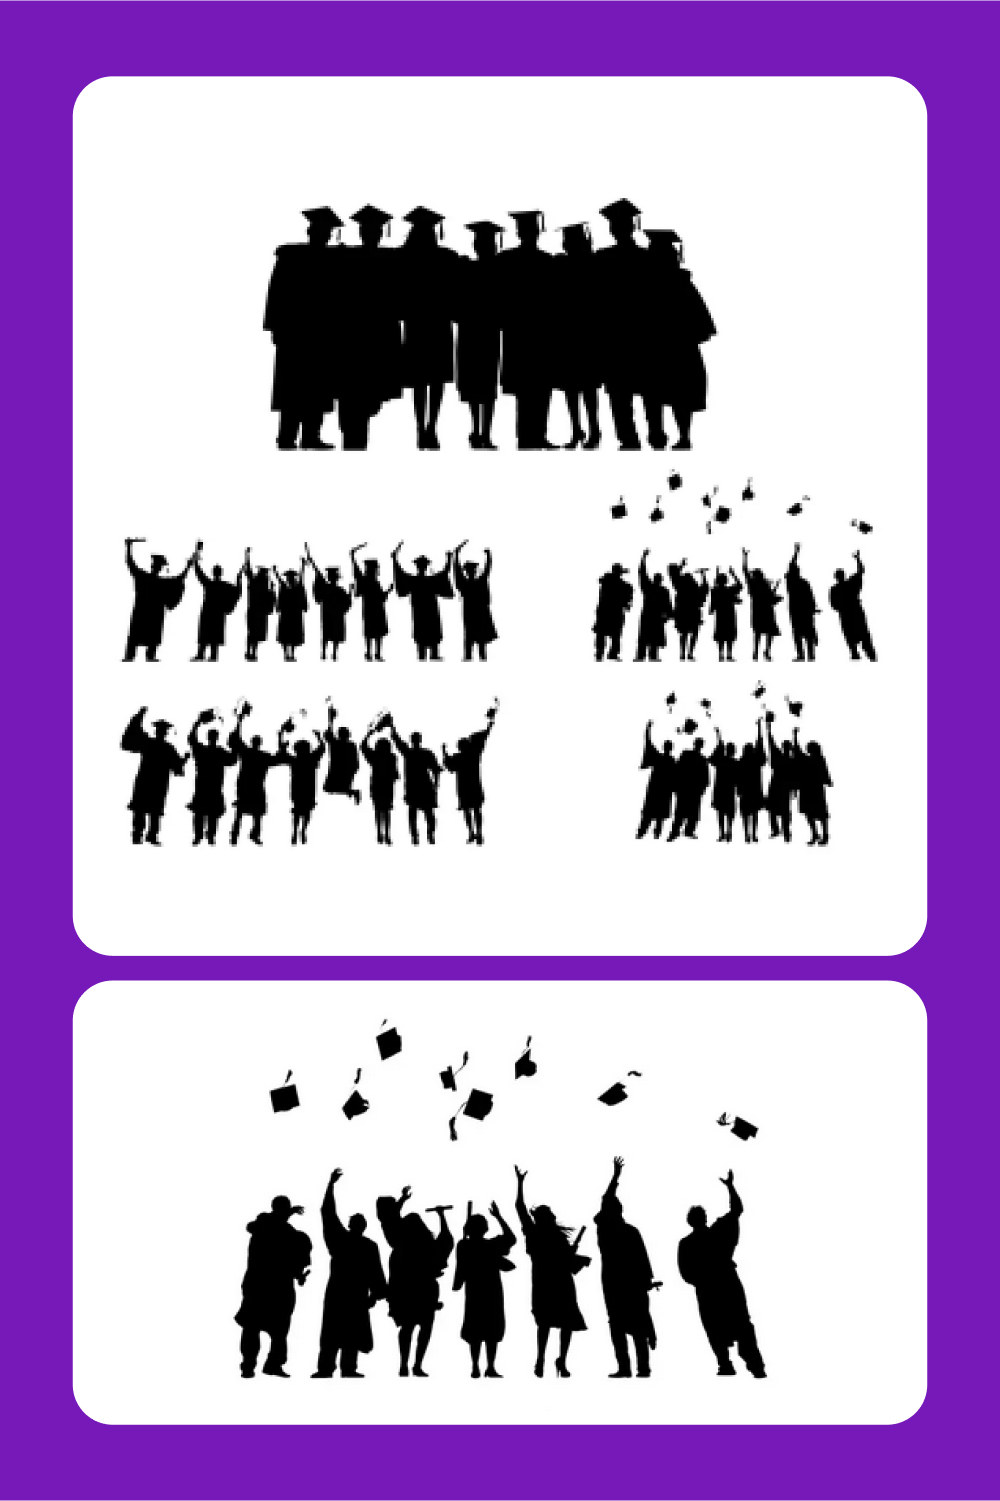 Collage of black and white silhouettes of students on graduation day.